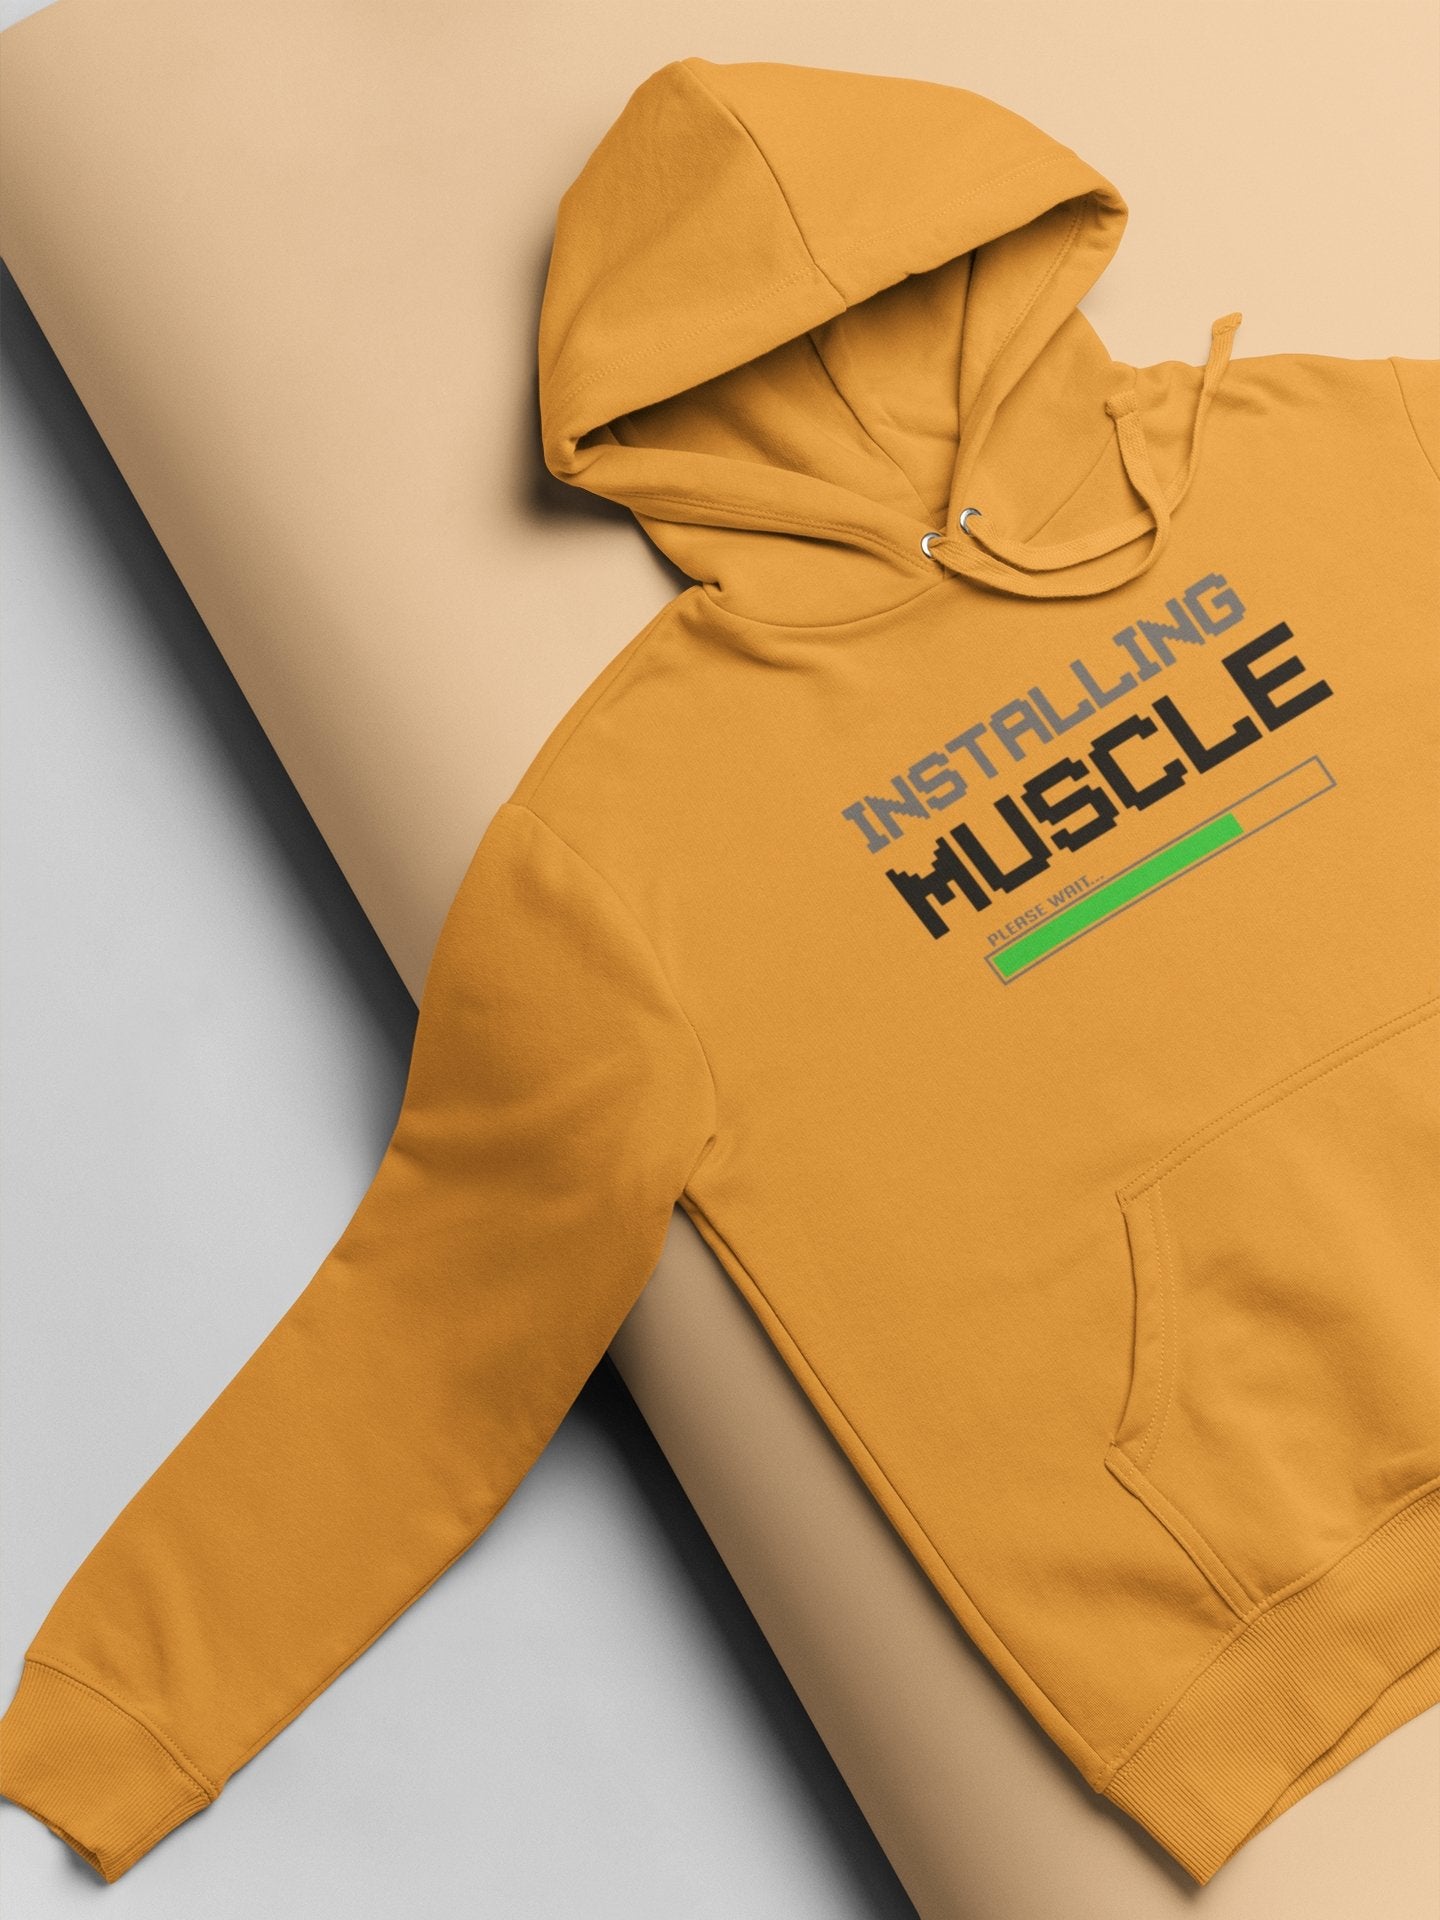 Installing Muscles Gym And Workout Hoodies for Women-FunkyTradition - Funky Tees Club